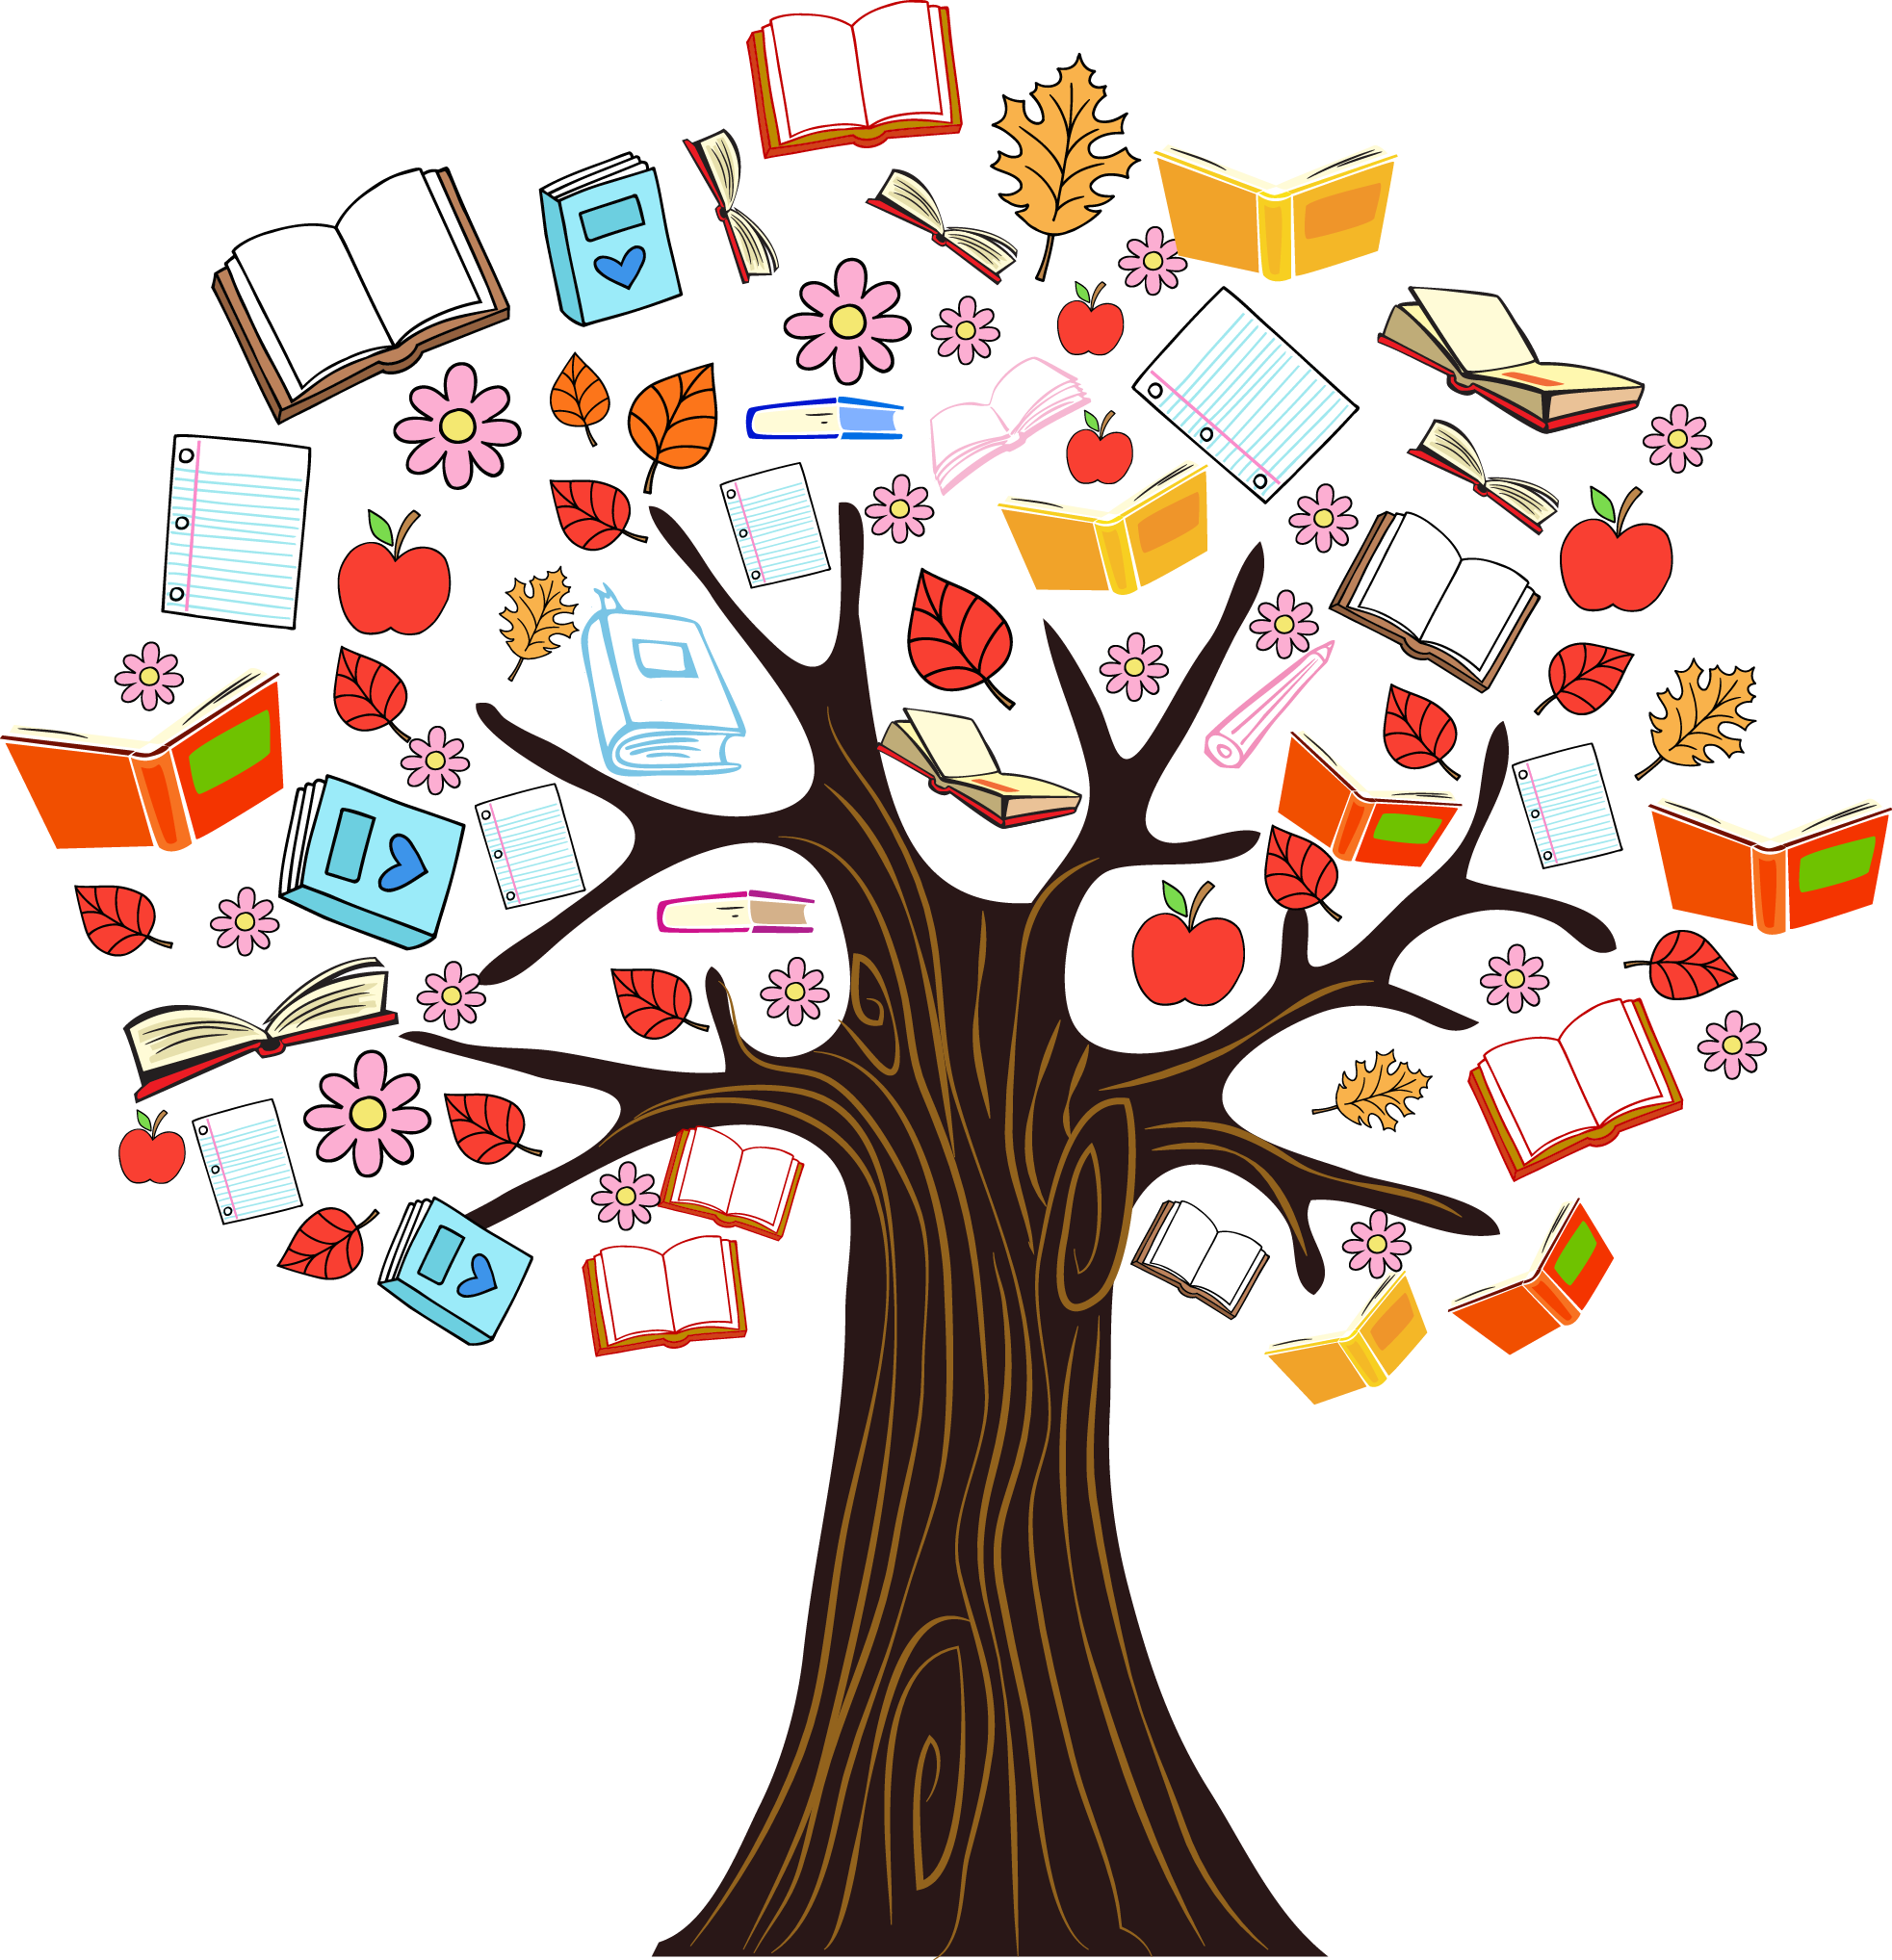 clipart tree book